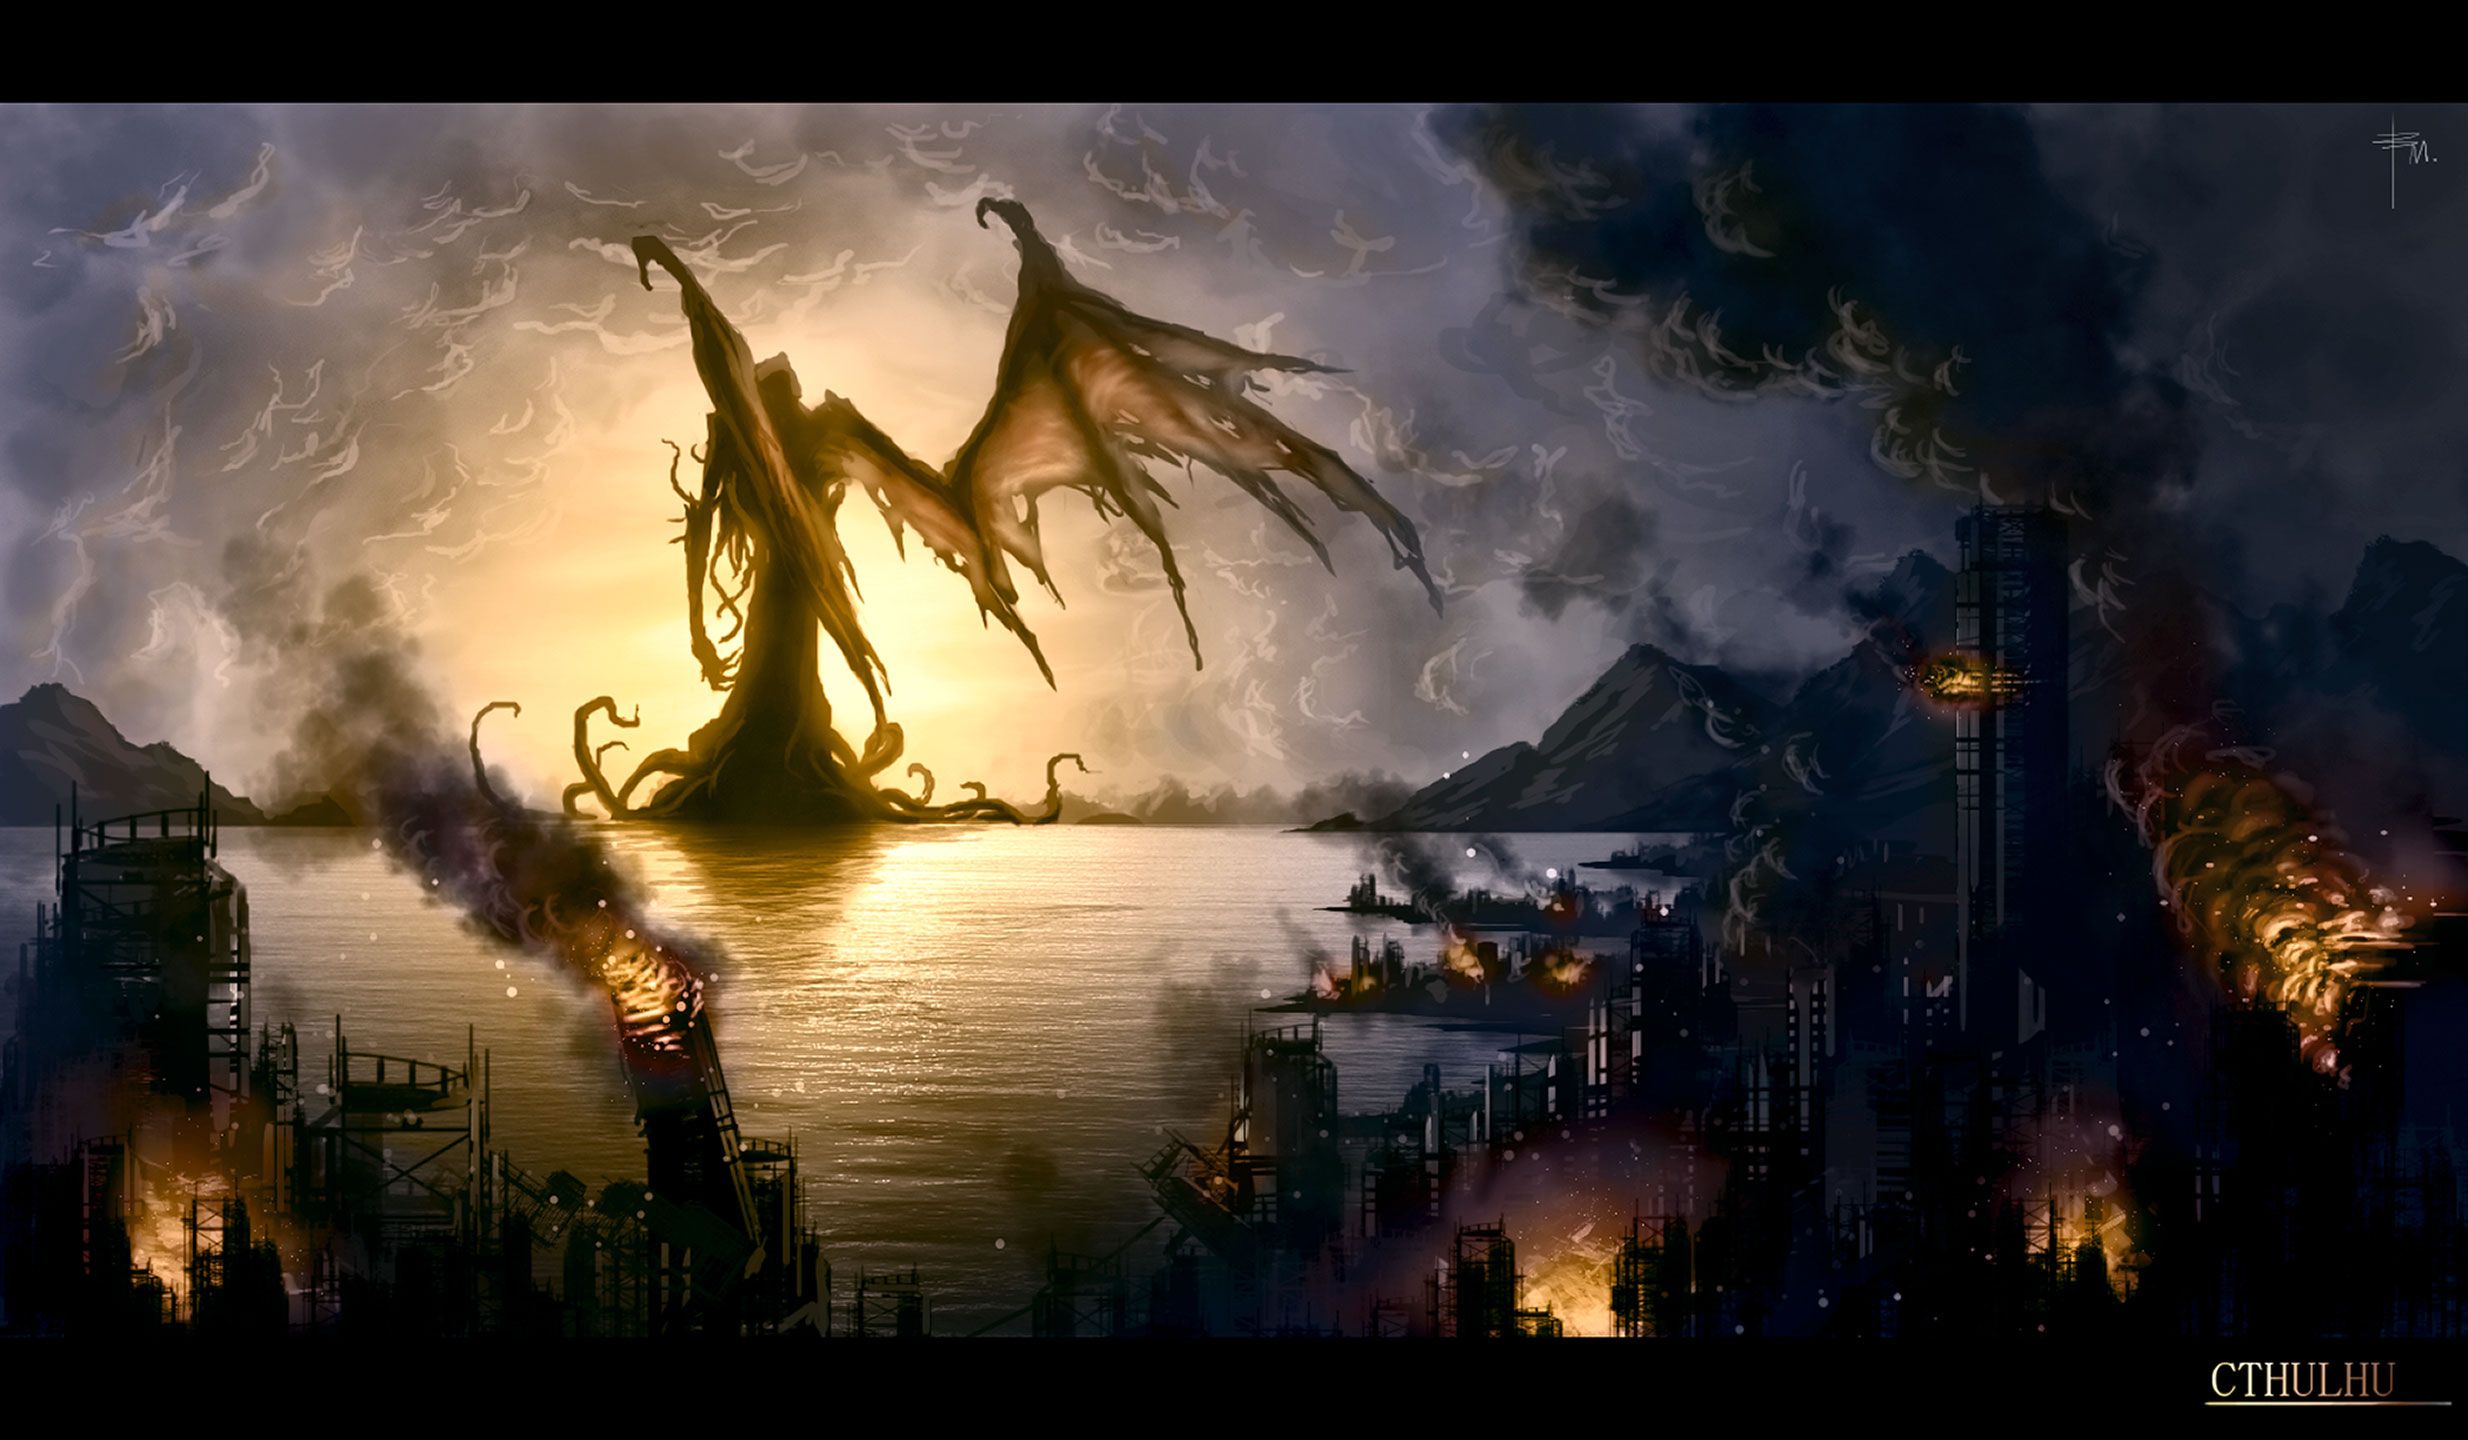 Dragon Mythical Creatures Fantasy City Art Wallpaper iPhone Phone 4K #1820f